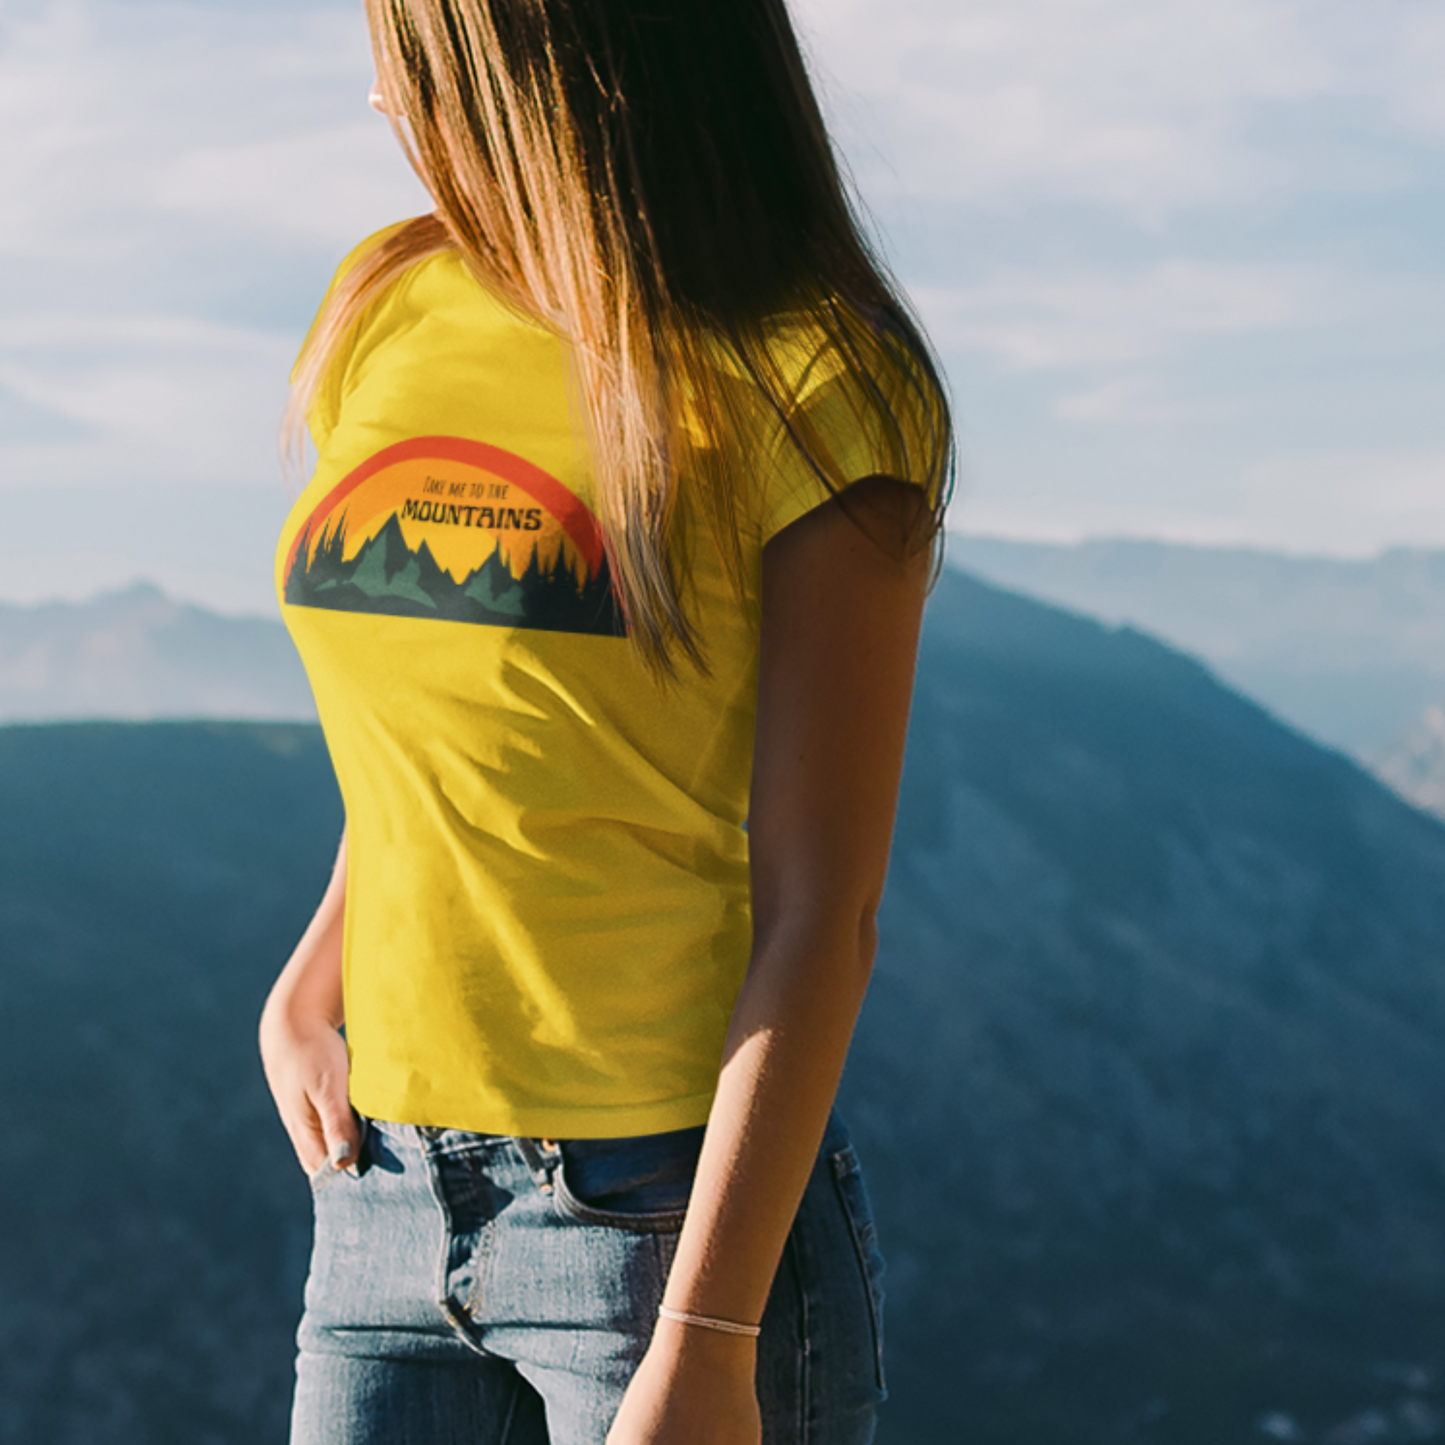 Unisex Softstyle T-Shirt, Take Me To The Mountains